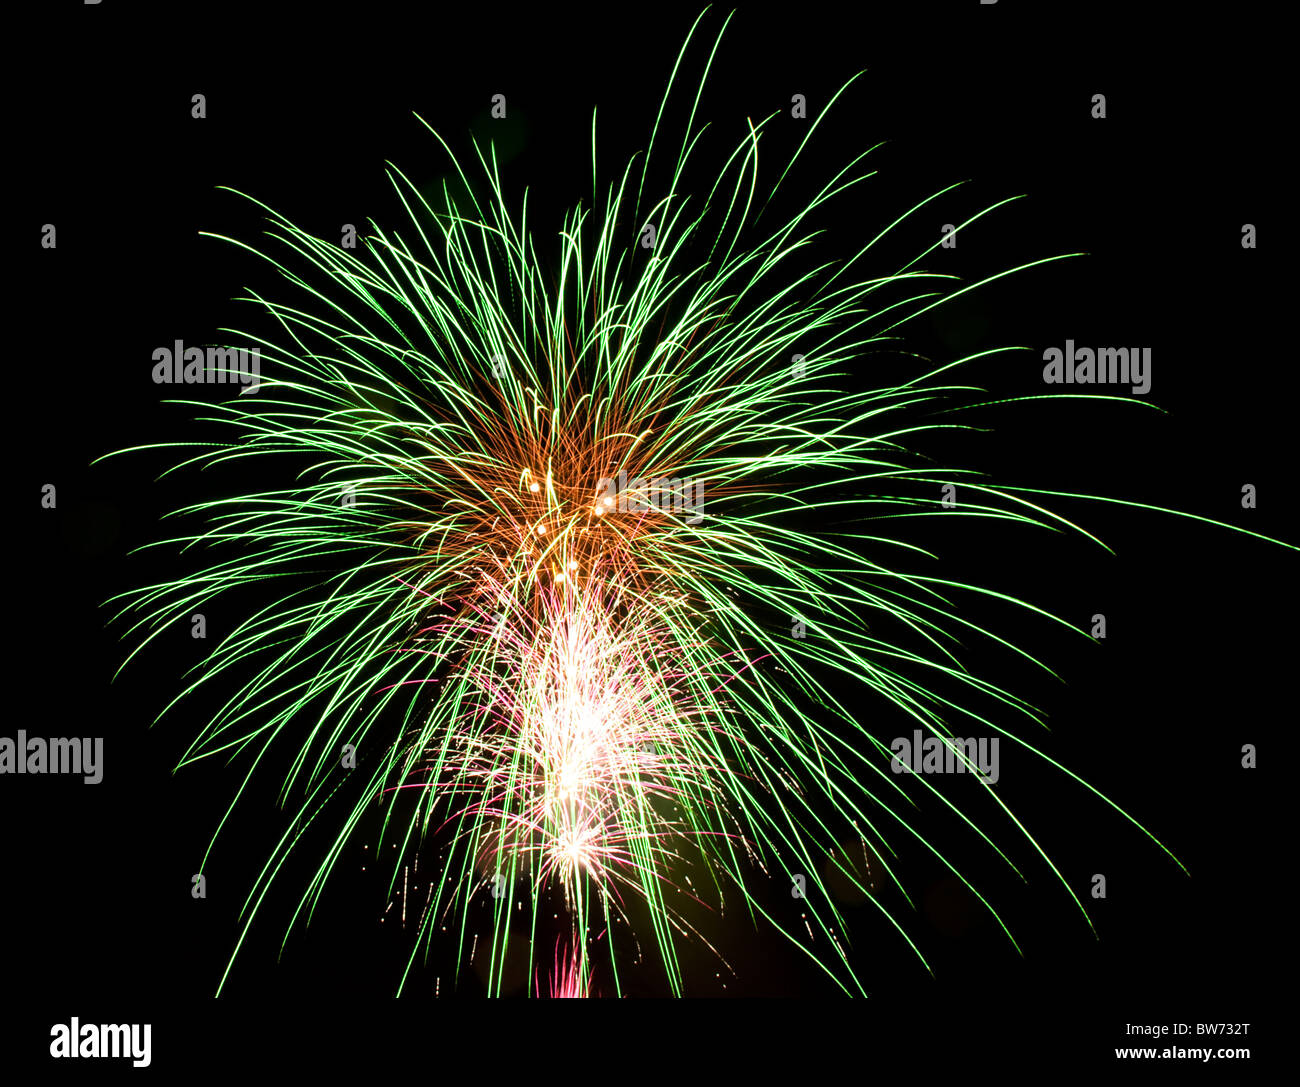 Festivals, Guy Fawkes, Fireworks, Colourful display of Pyrotechnics. Stock Photo